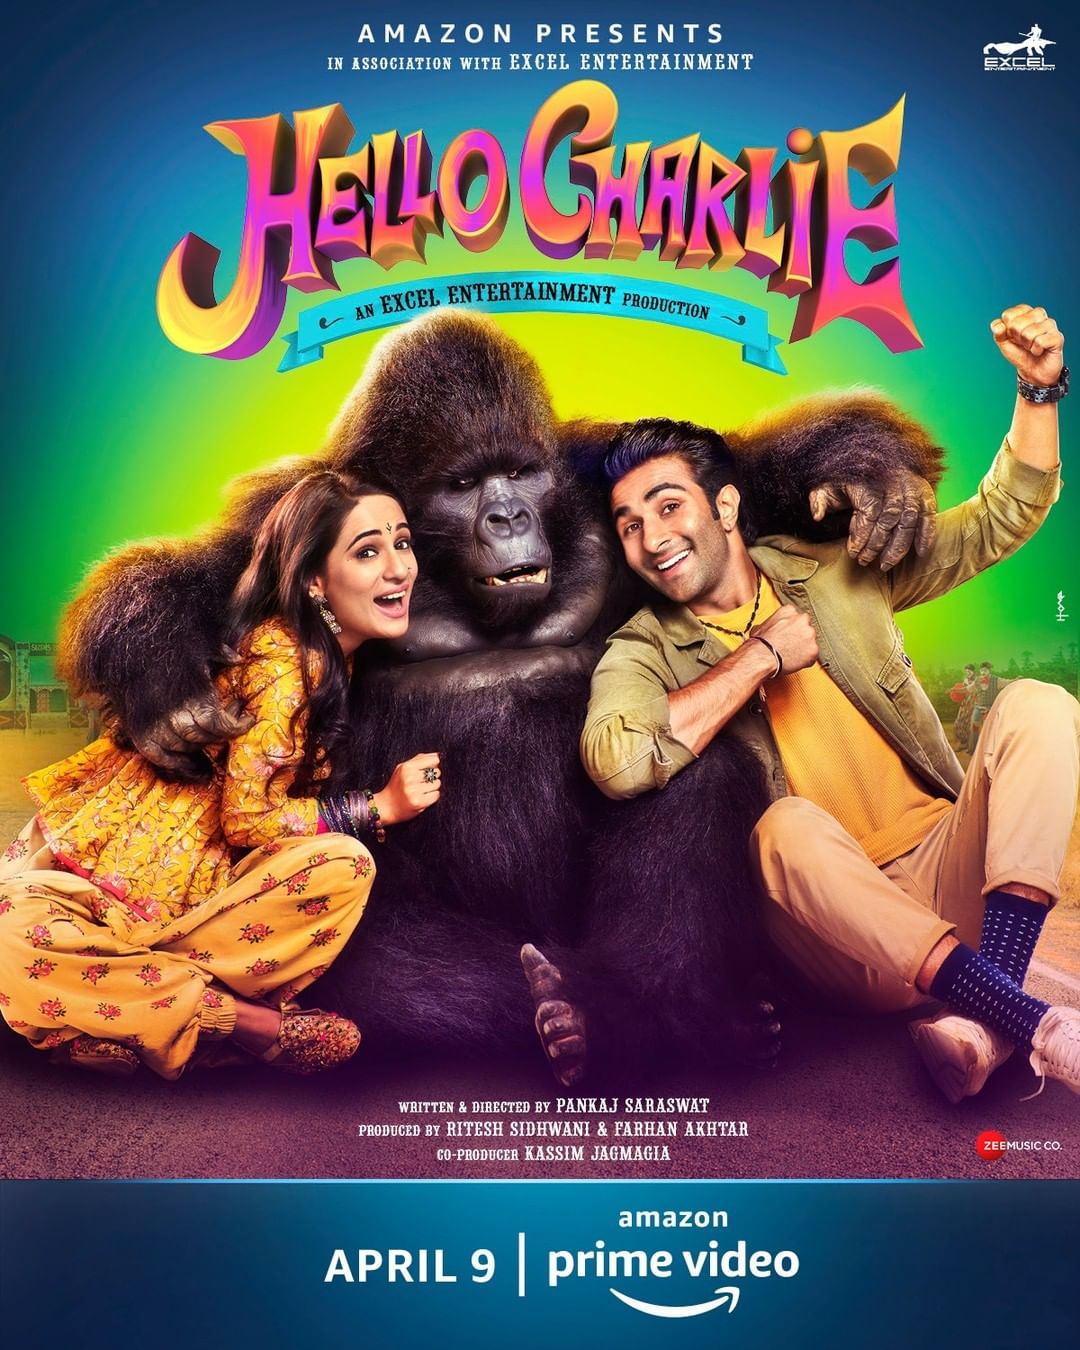 Hello Charlie comedy movies latest bollywood